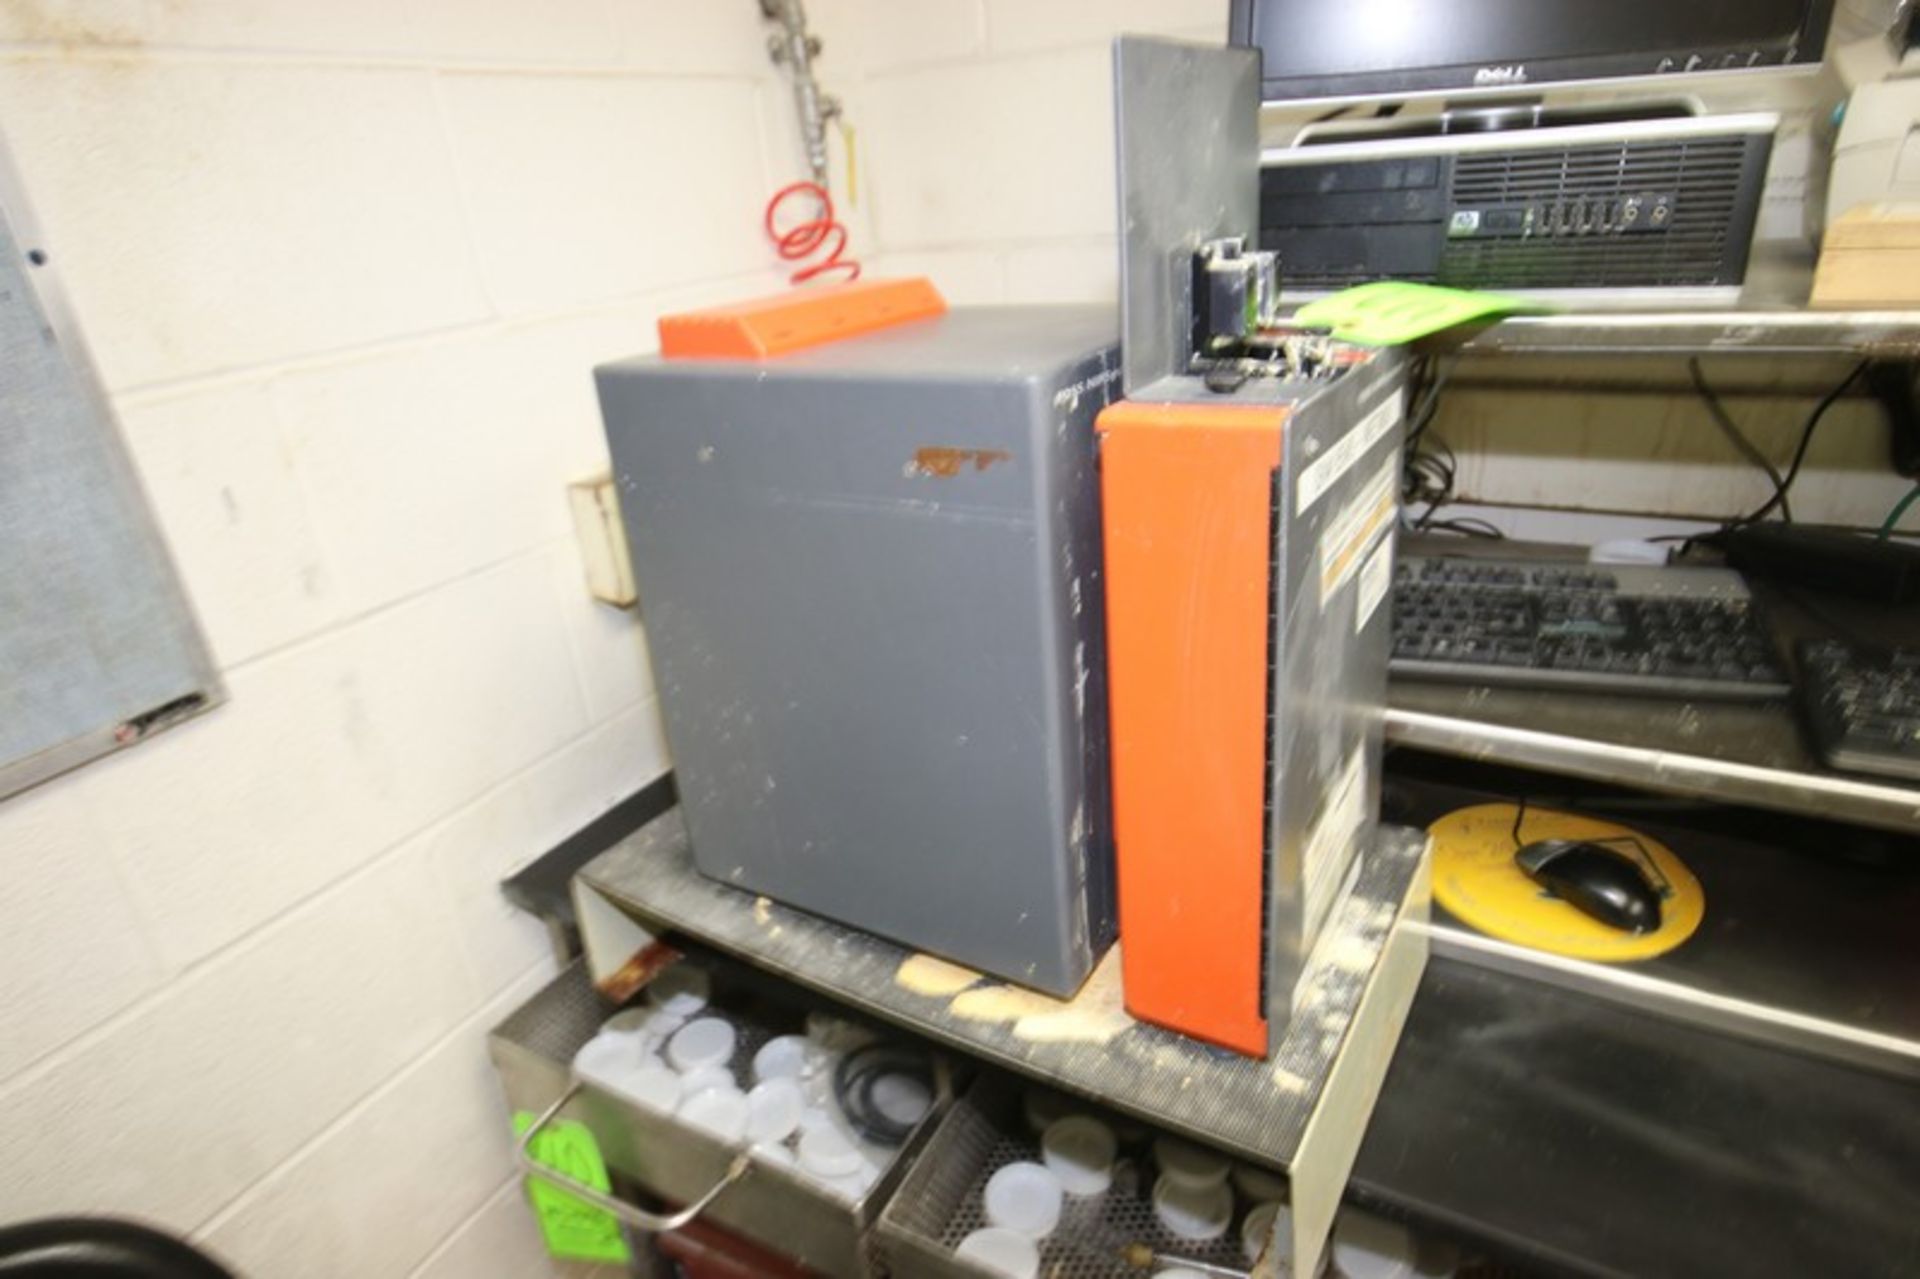 Foss NIRSystems Analyzer, M/N 6500-M, S/N 6545, 100-240 Volts (INV#82385)(LOCATED @ MDG AUCTION - Image 9 of 9